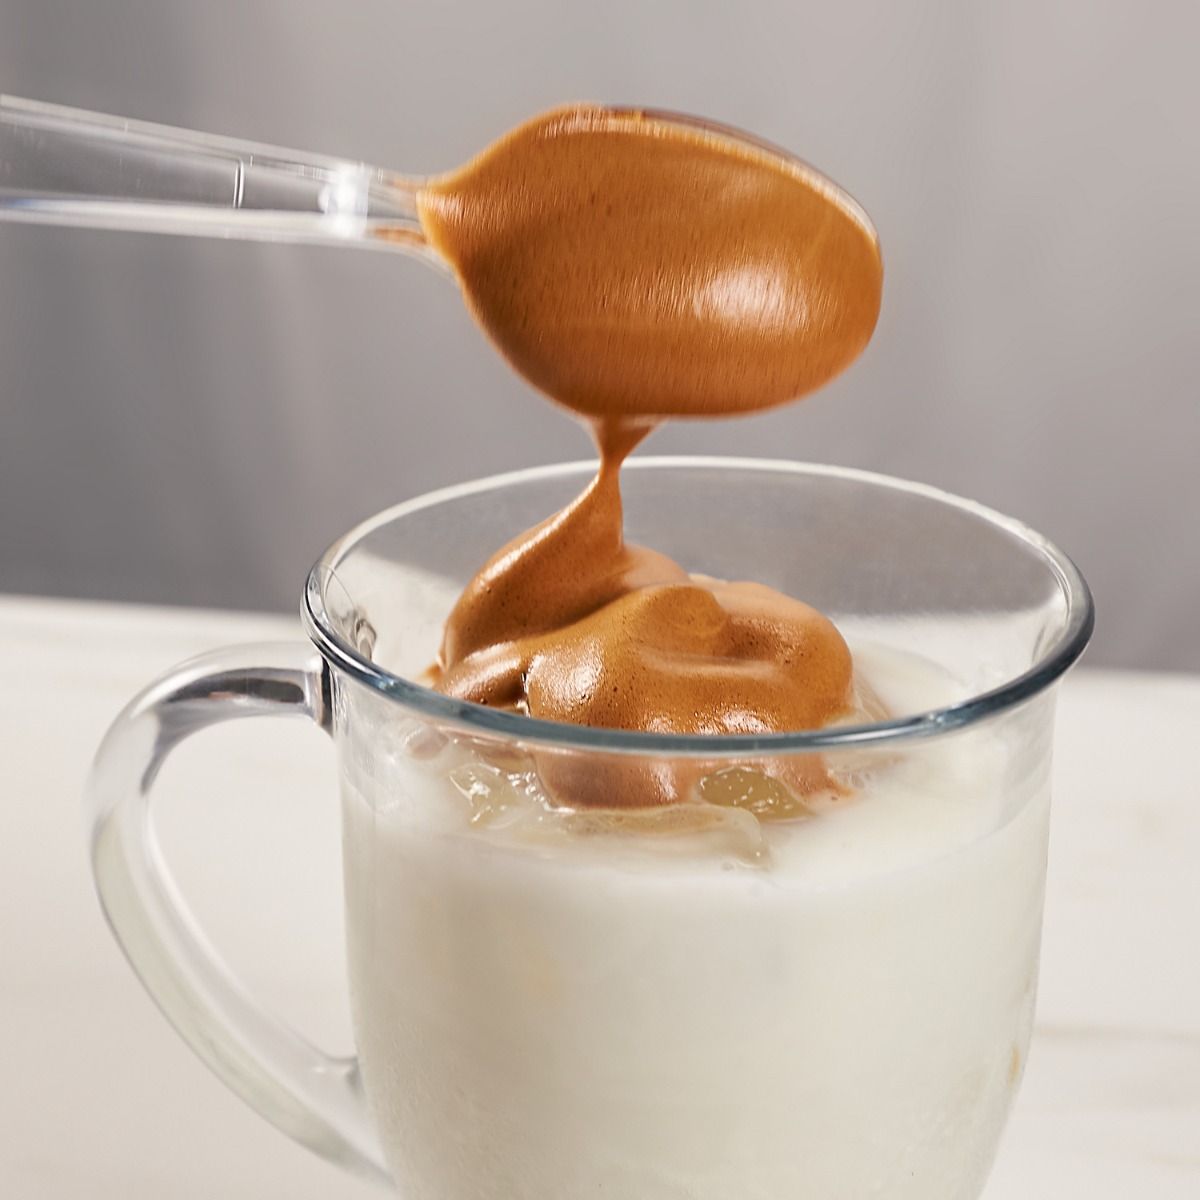 whipped coffee added to milk